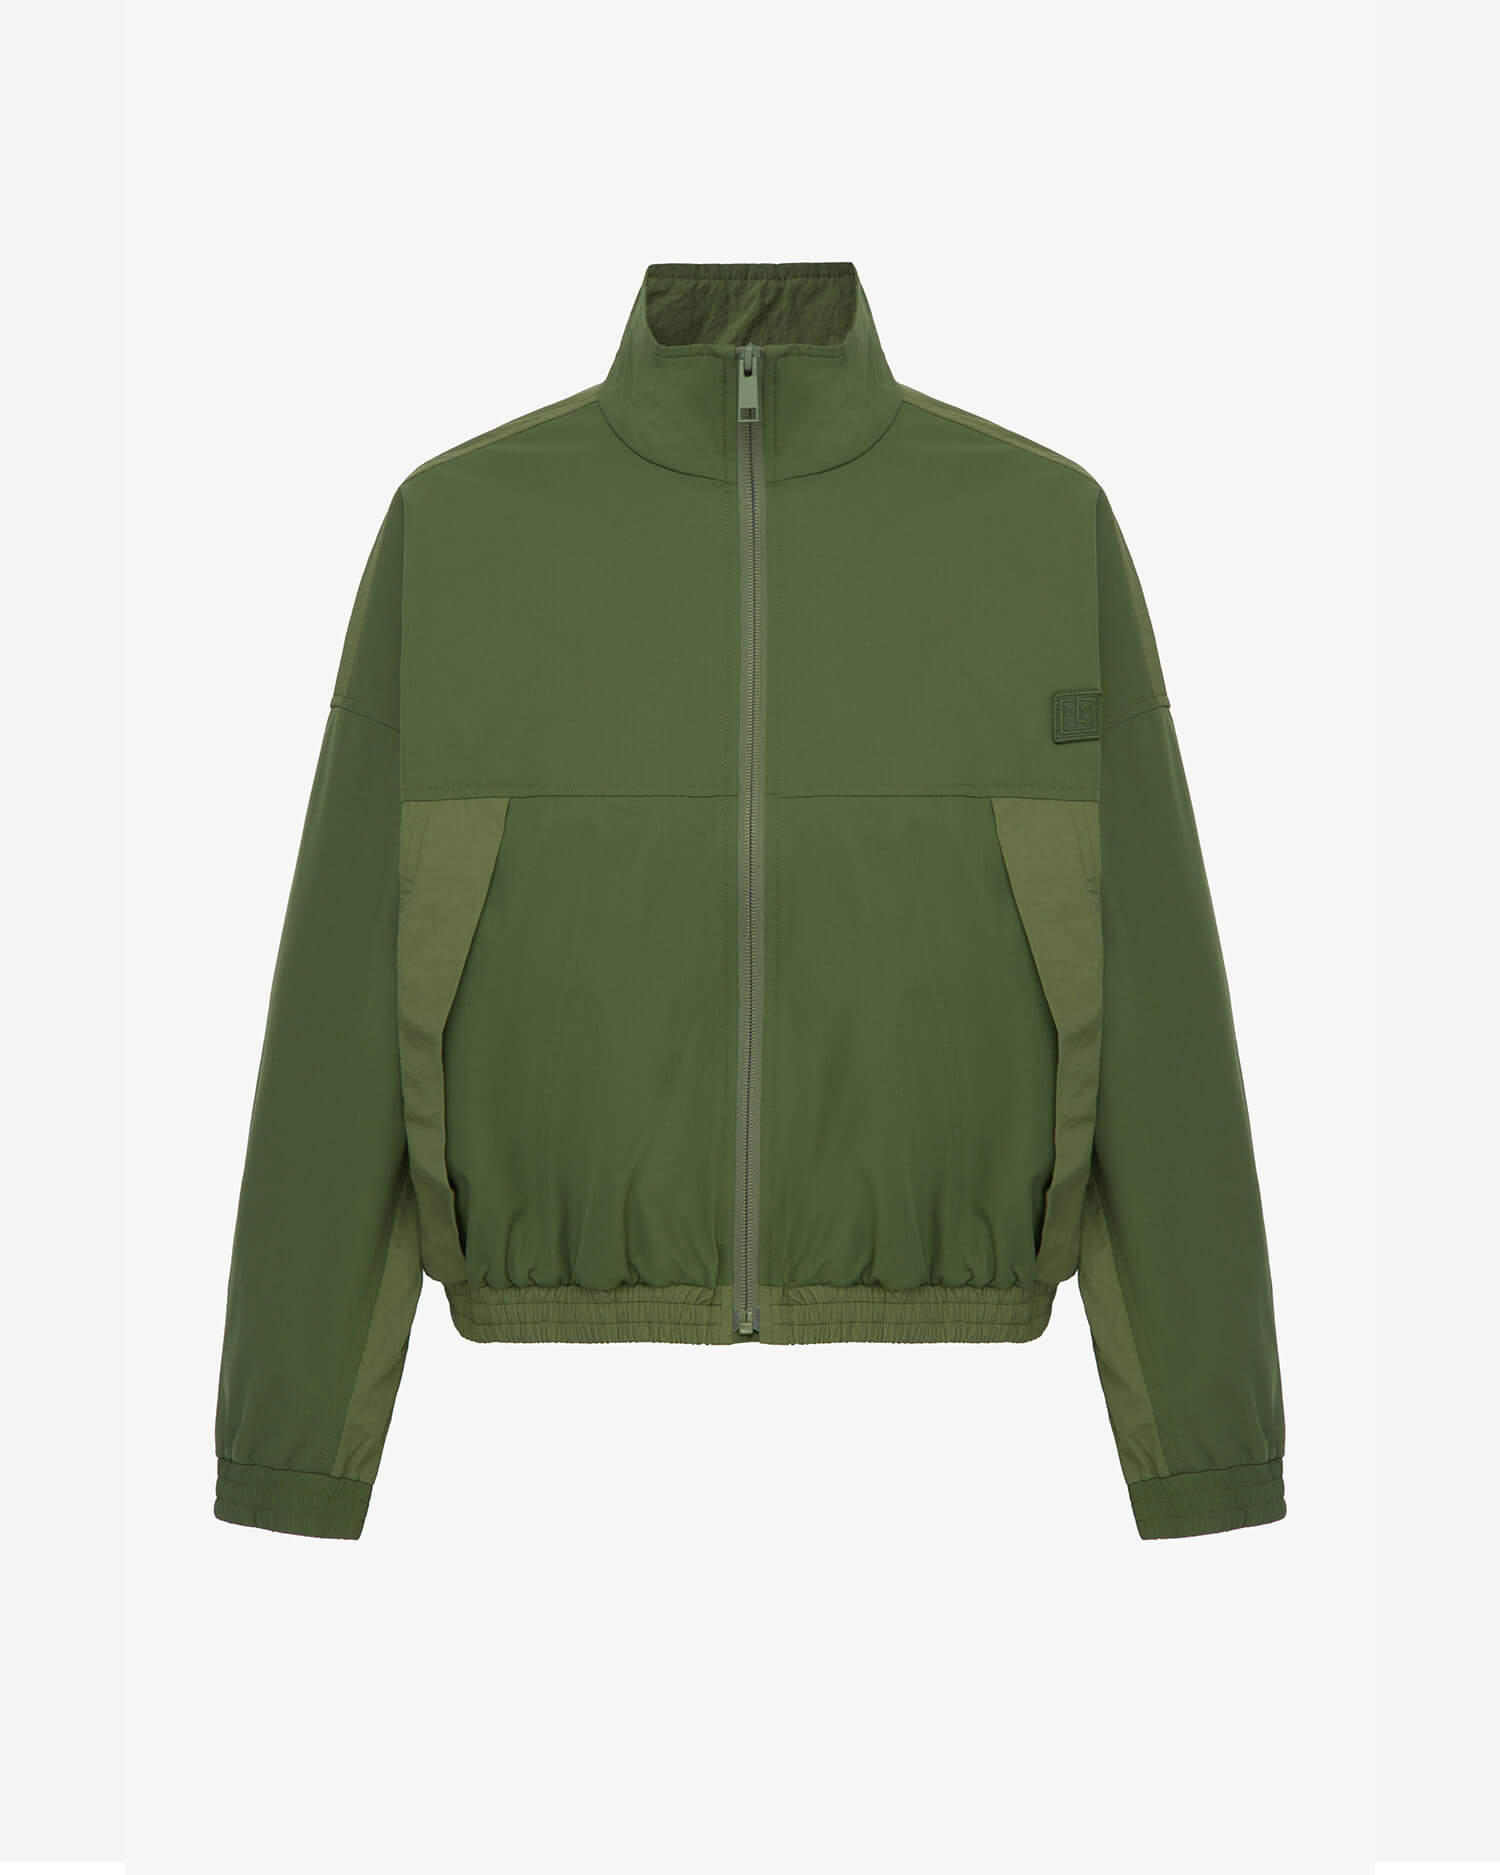 Women's Cropped Track Jacket in Military Green 01 #military-green